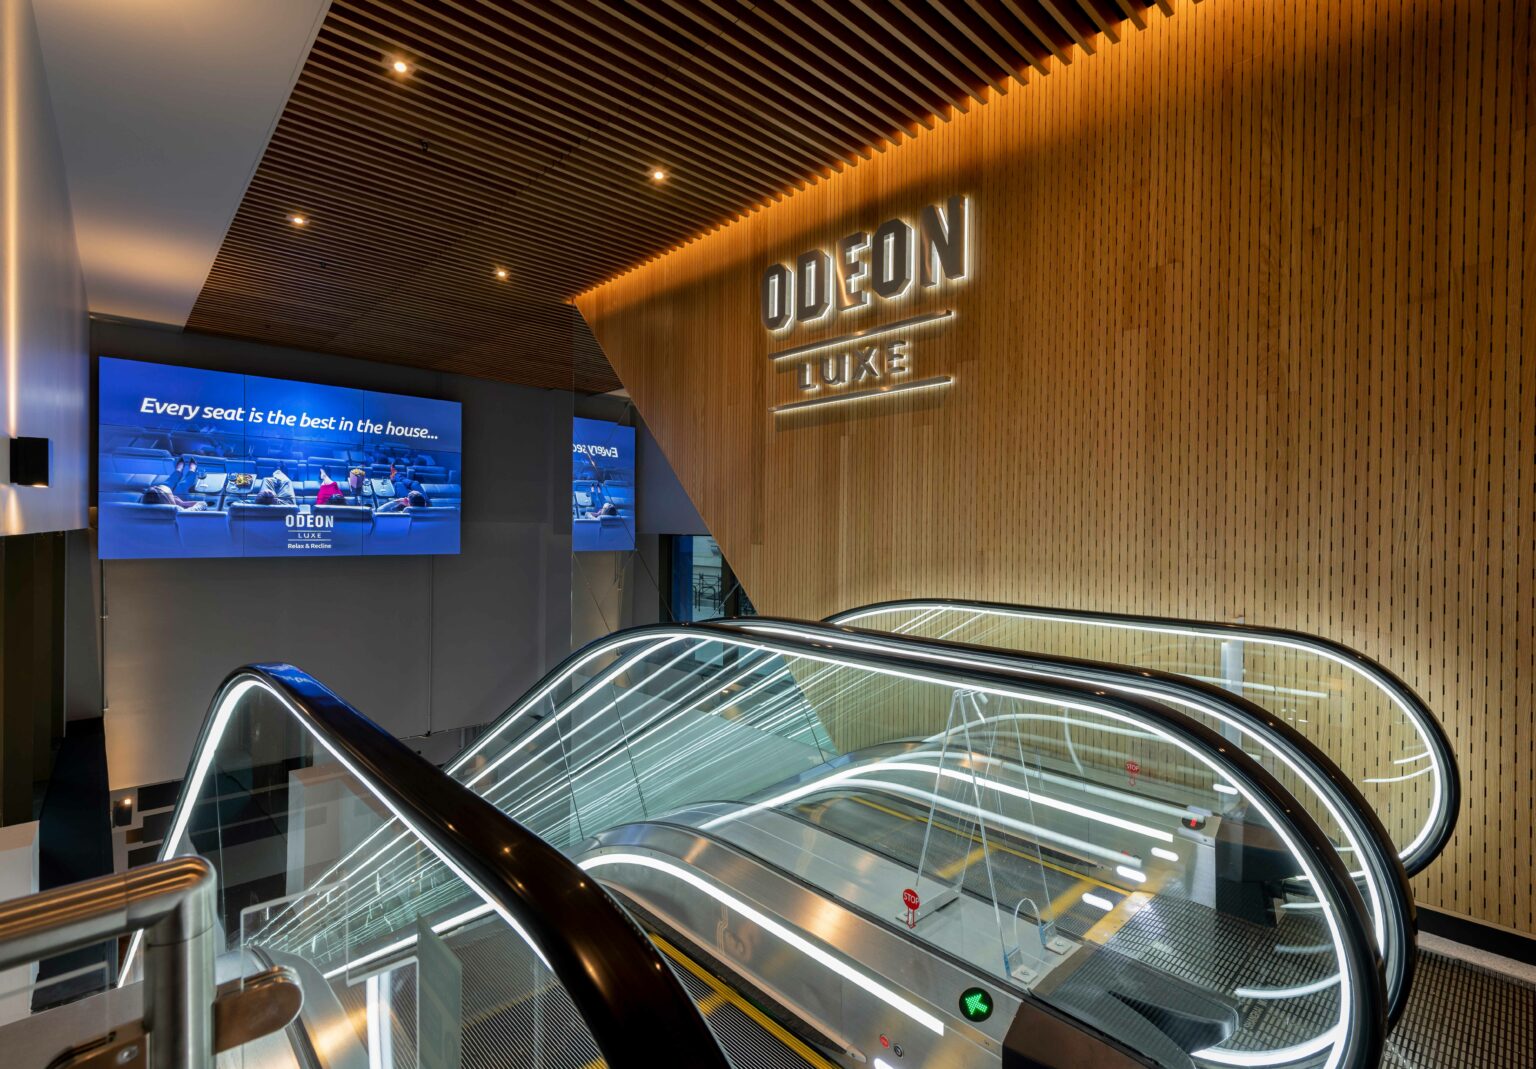 ODEON Luxe West End